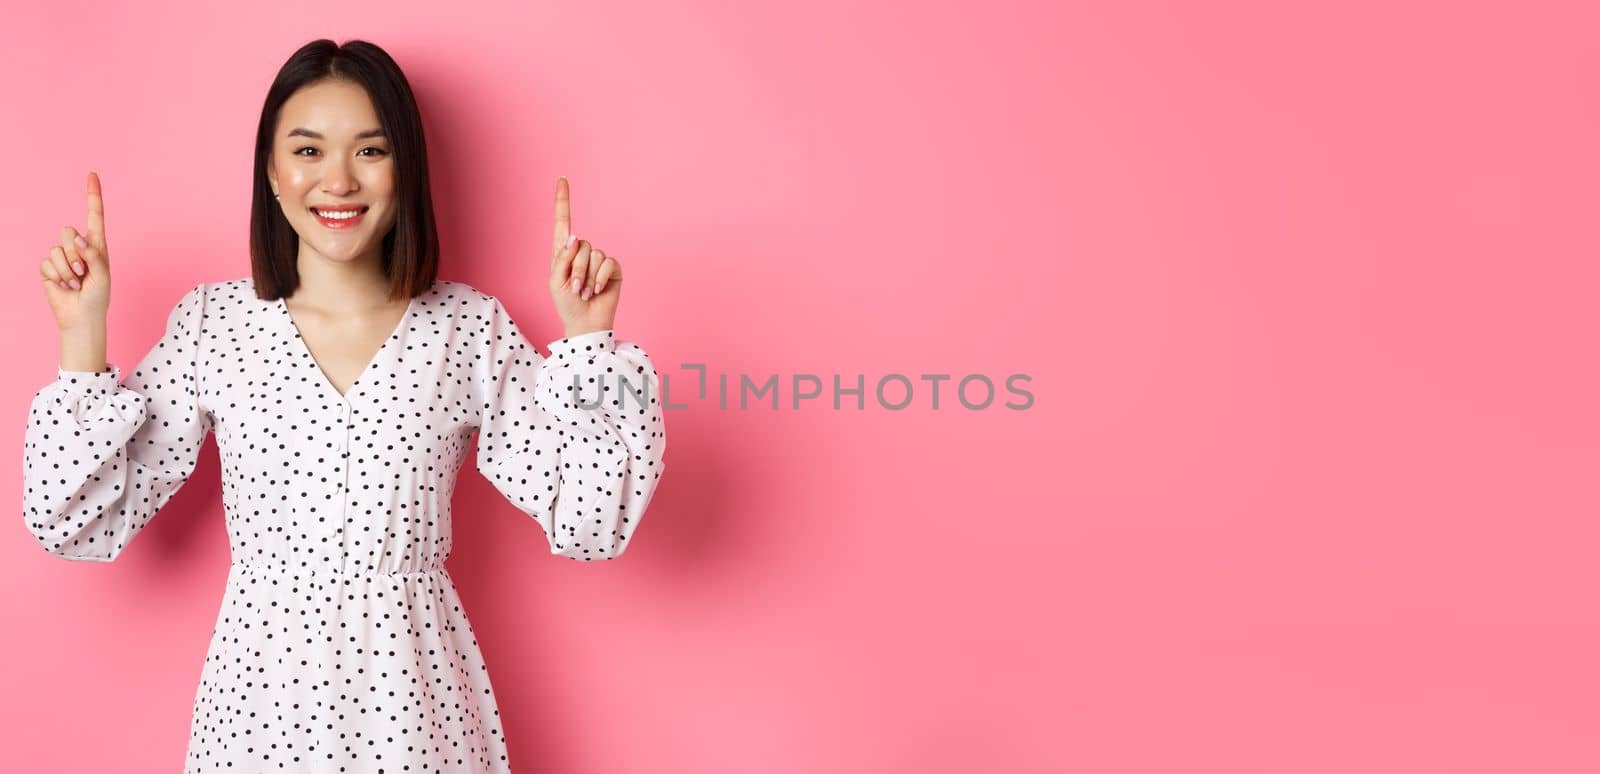 Beautiful Korean young woman in dress showing announcement, pointing fingers up at promo copy space, smiling happy, standing over pink background.